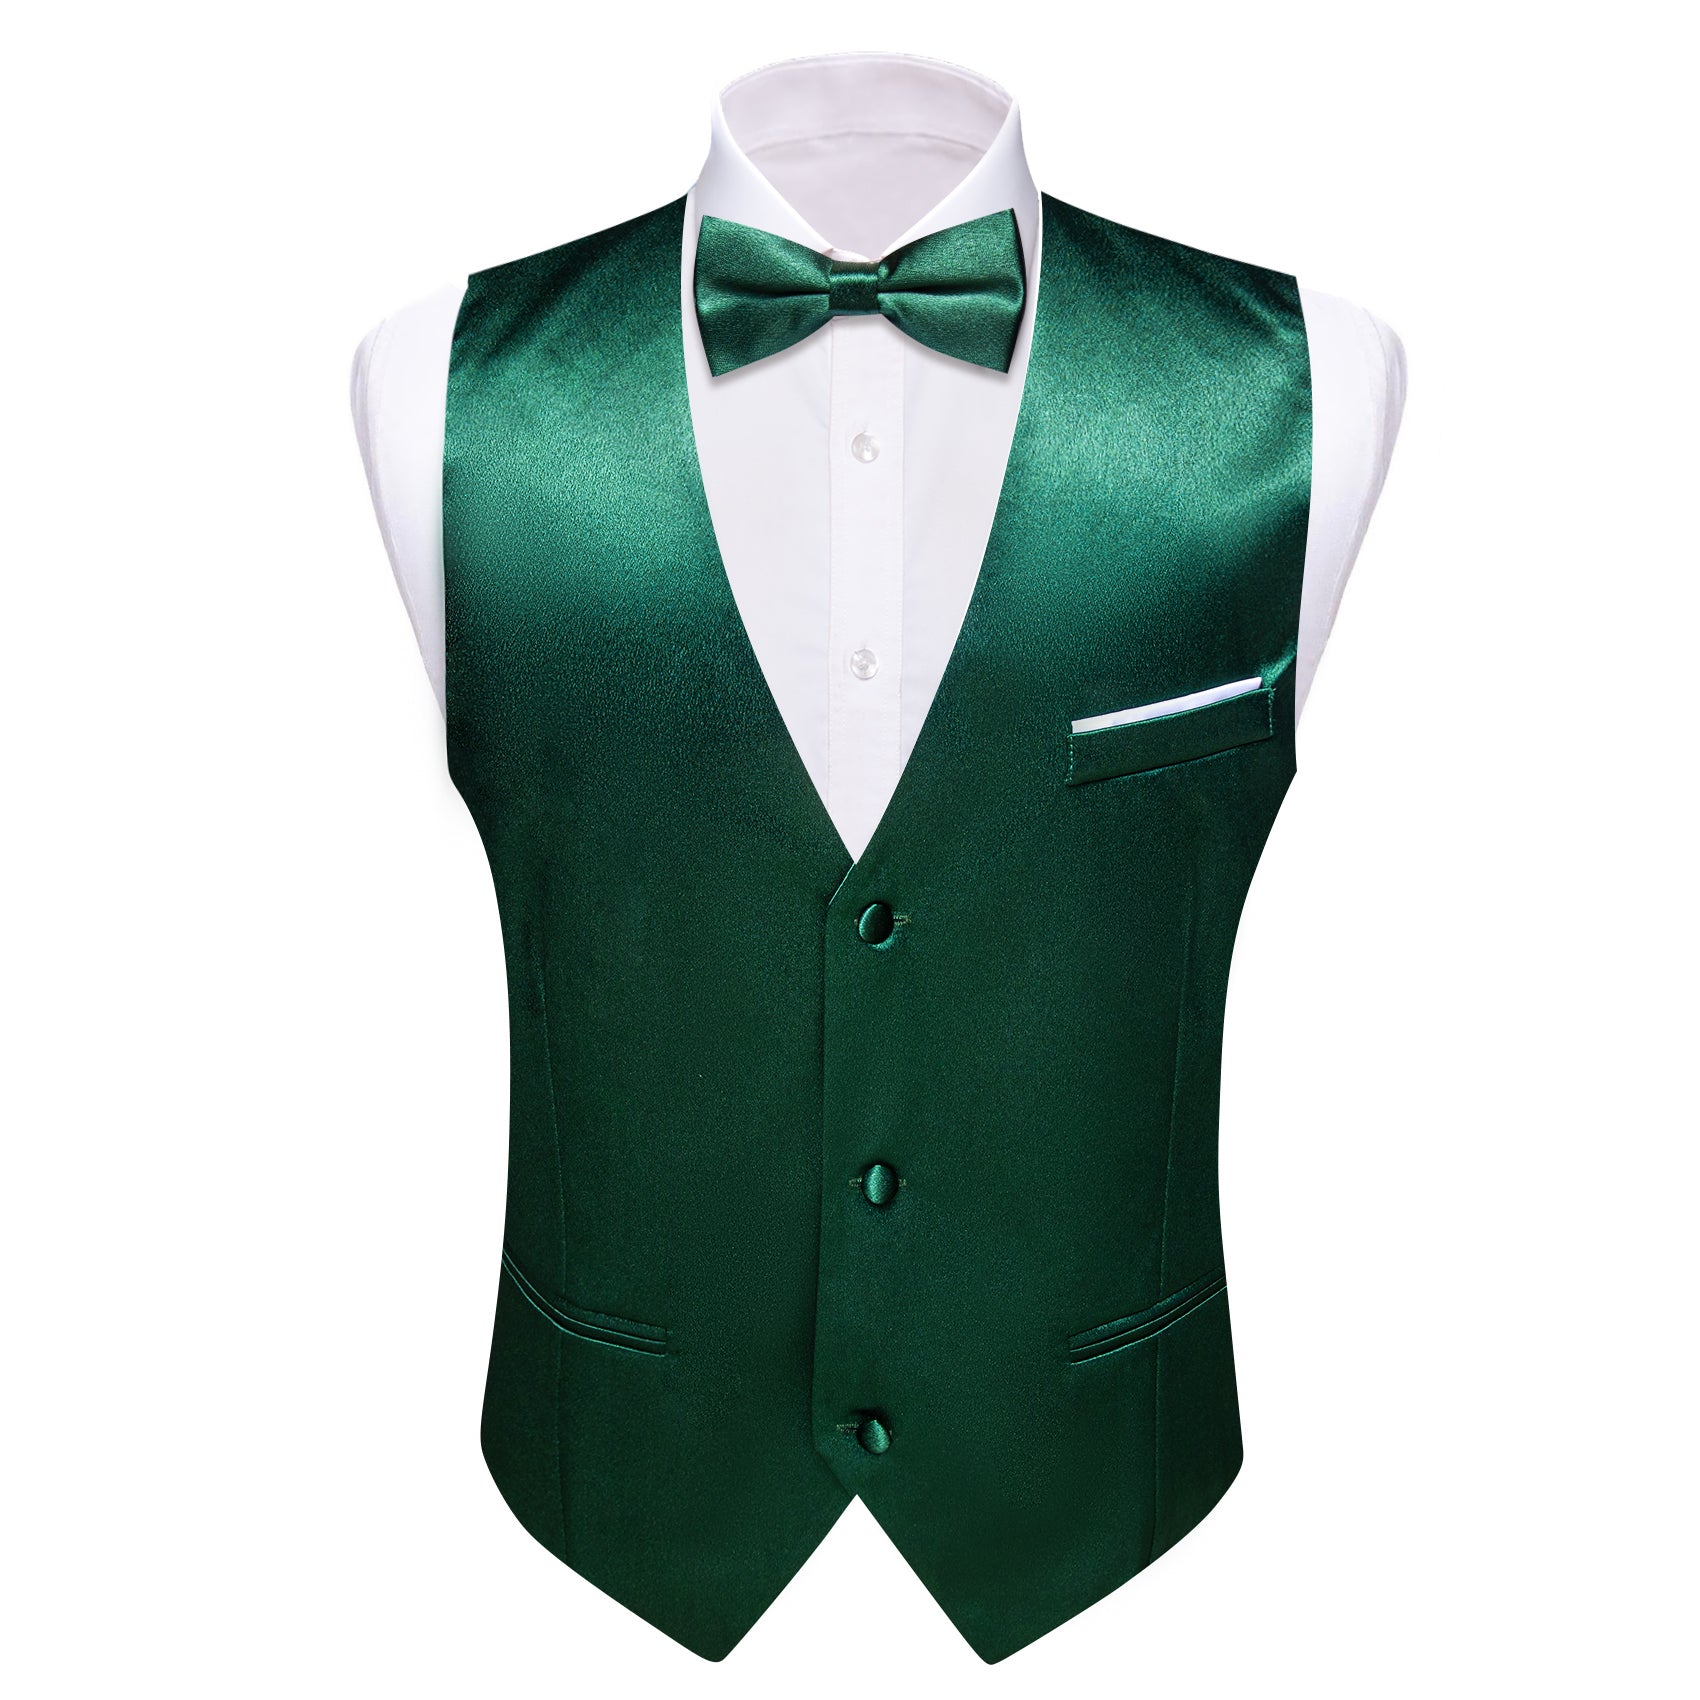 Barry.wang Green Solid Business Vest Suit